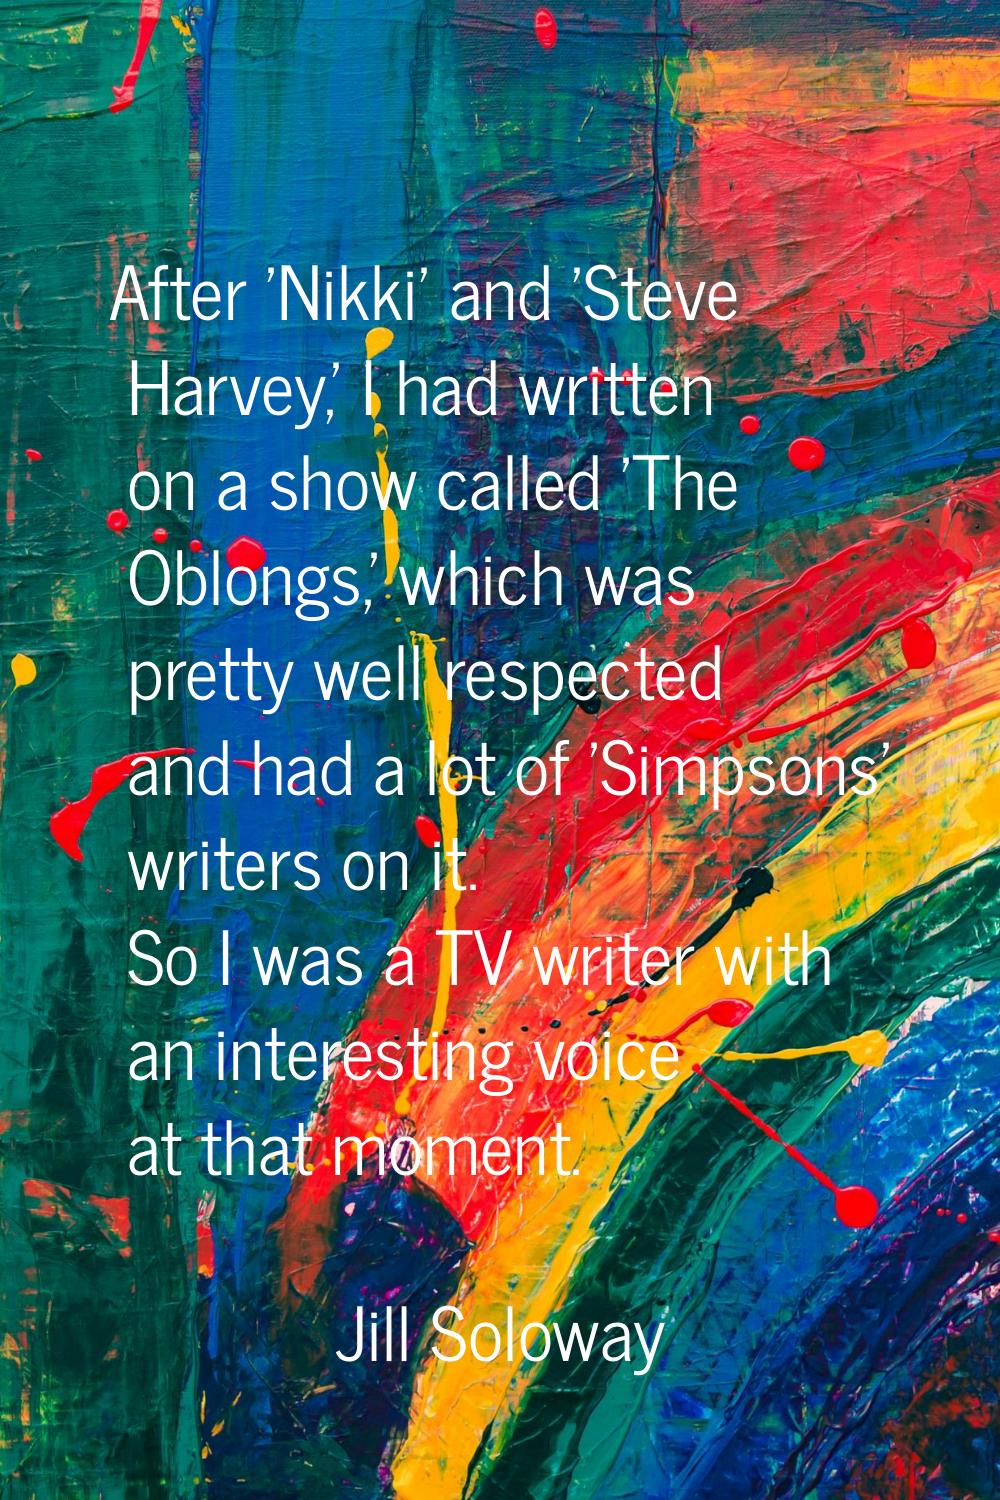 After 'Nikki' and 'Steve Harvey,' I had written on a show called 'The Oblongs,' which was pretty we